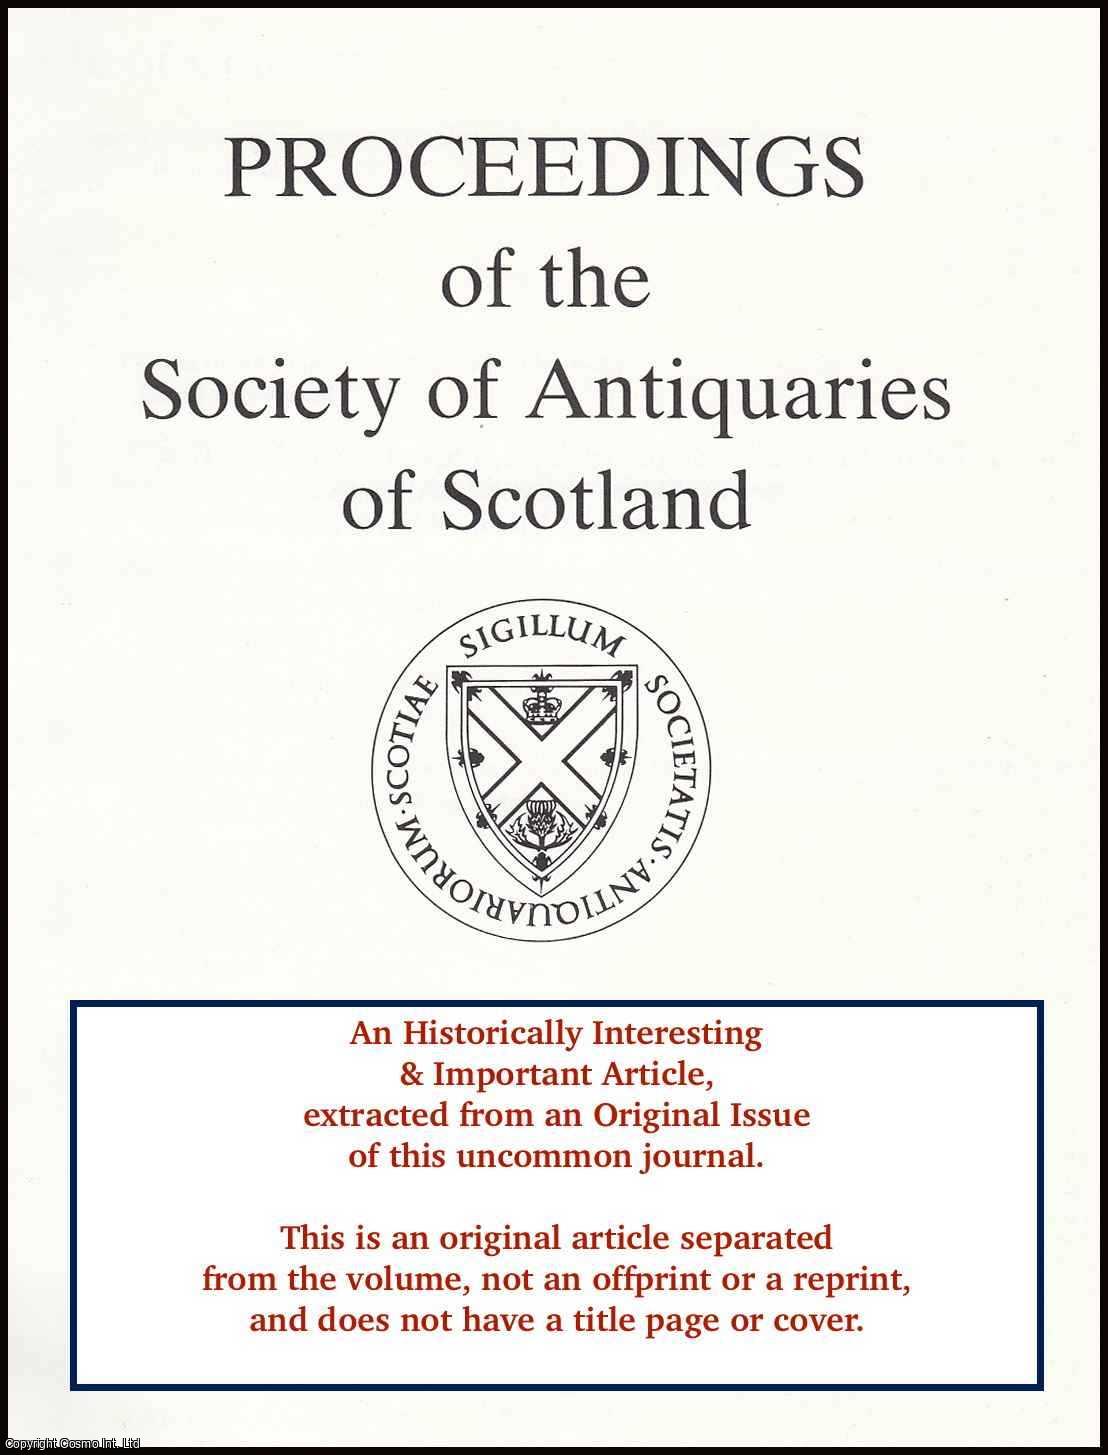 Penelope Dransart & Nicholas Q. Bogdan - The Material Culture of Recusancy at Fetternear: Kin and Religion in Post-Reformation Scotland. An original article from the Proceedings of the Society of Antiquaries of Scotland, 2004.